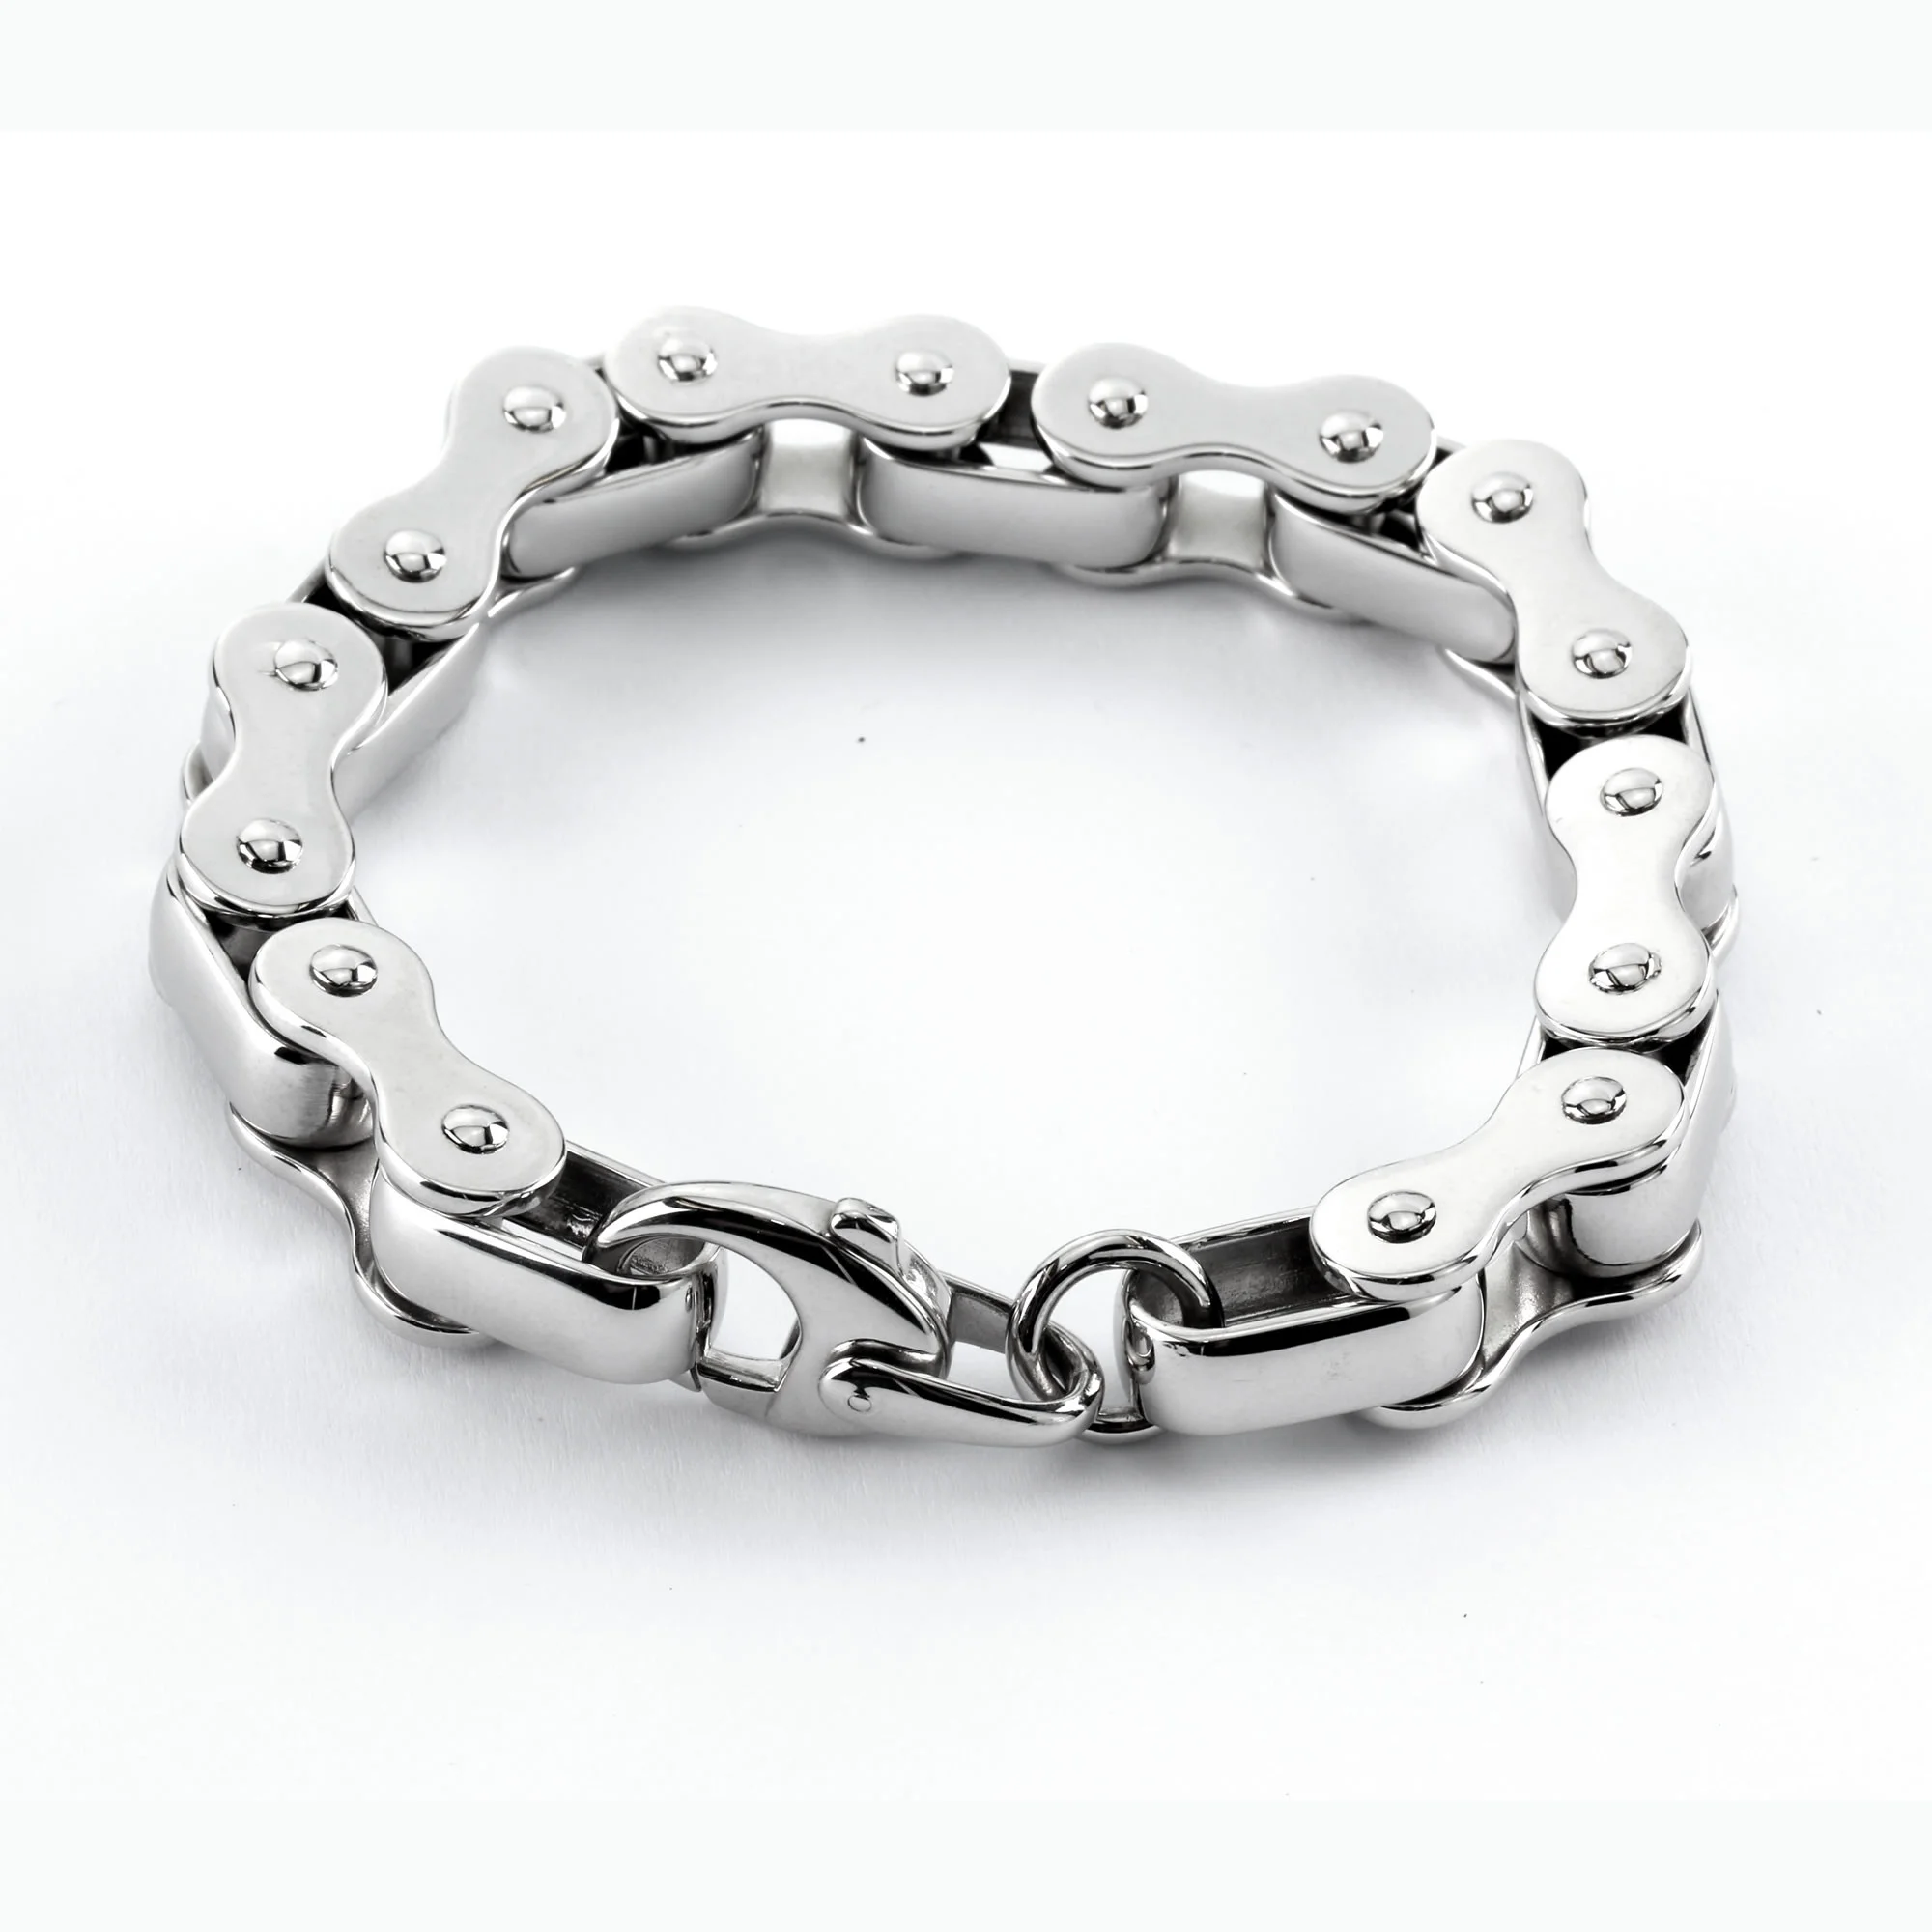 Men's Carbon Fibre Bike Chain Link Bracelet in Stainless Steel and Yellow  Ion Plate - 8.75